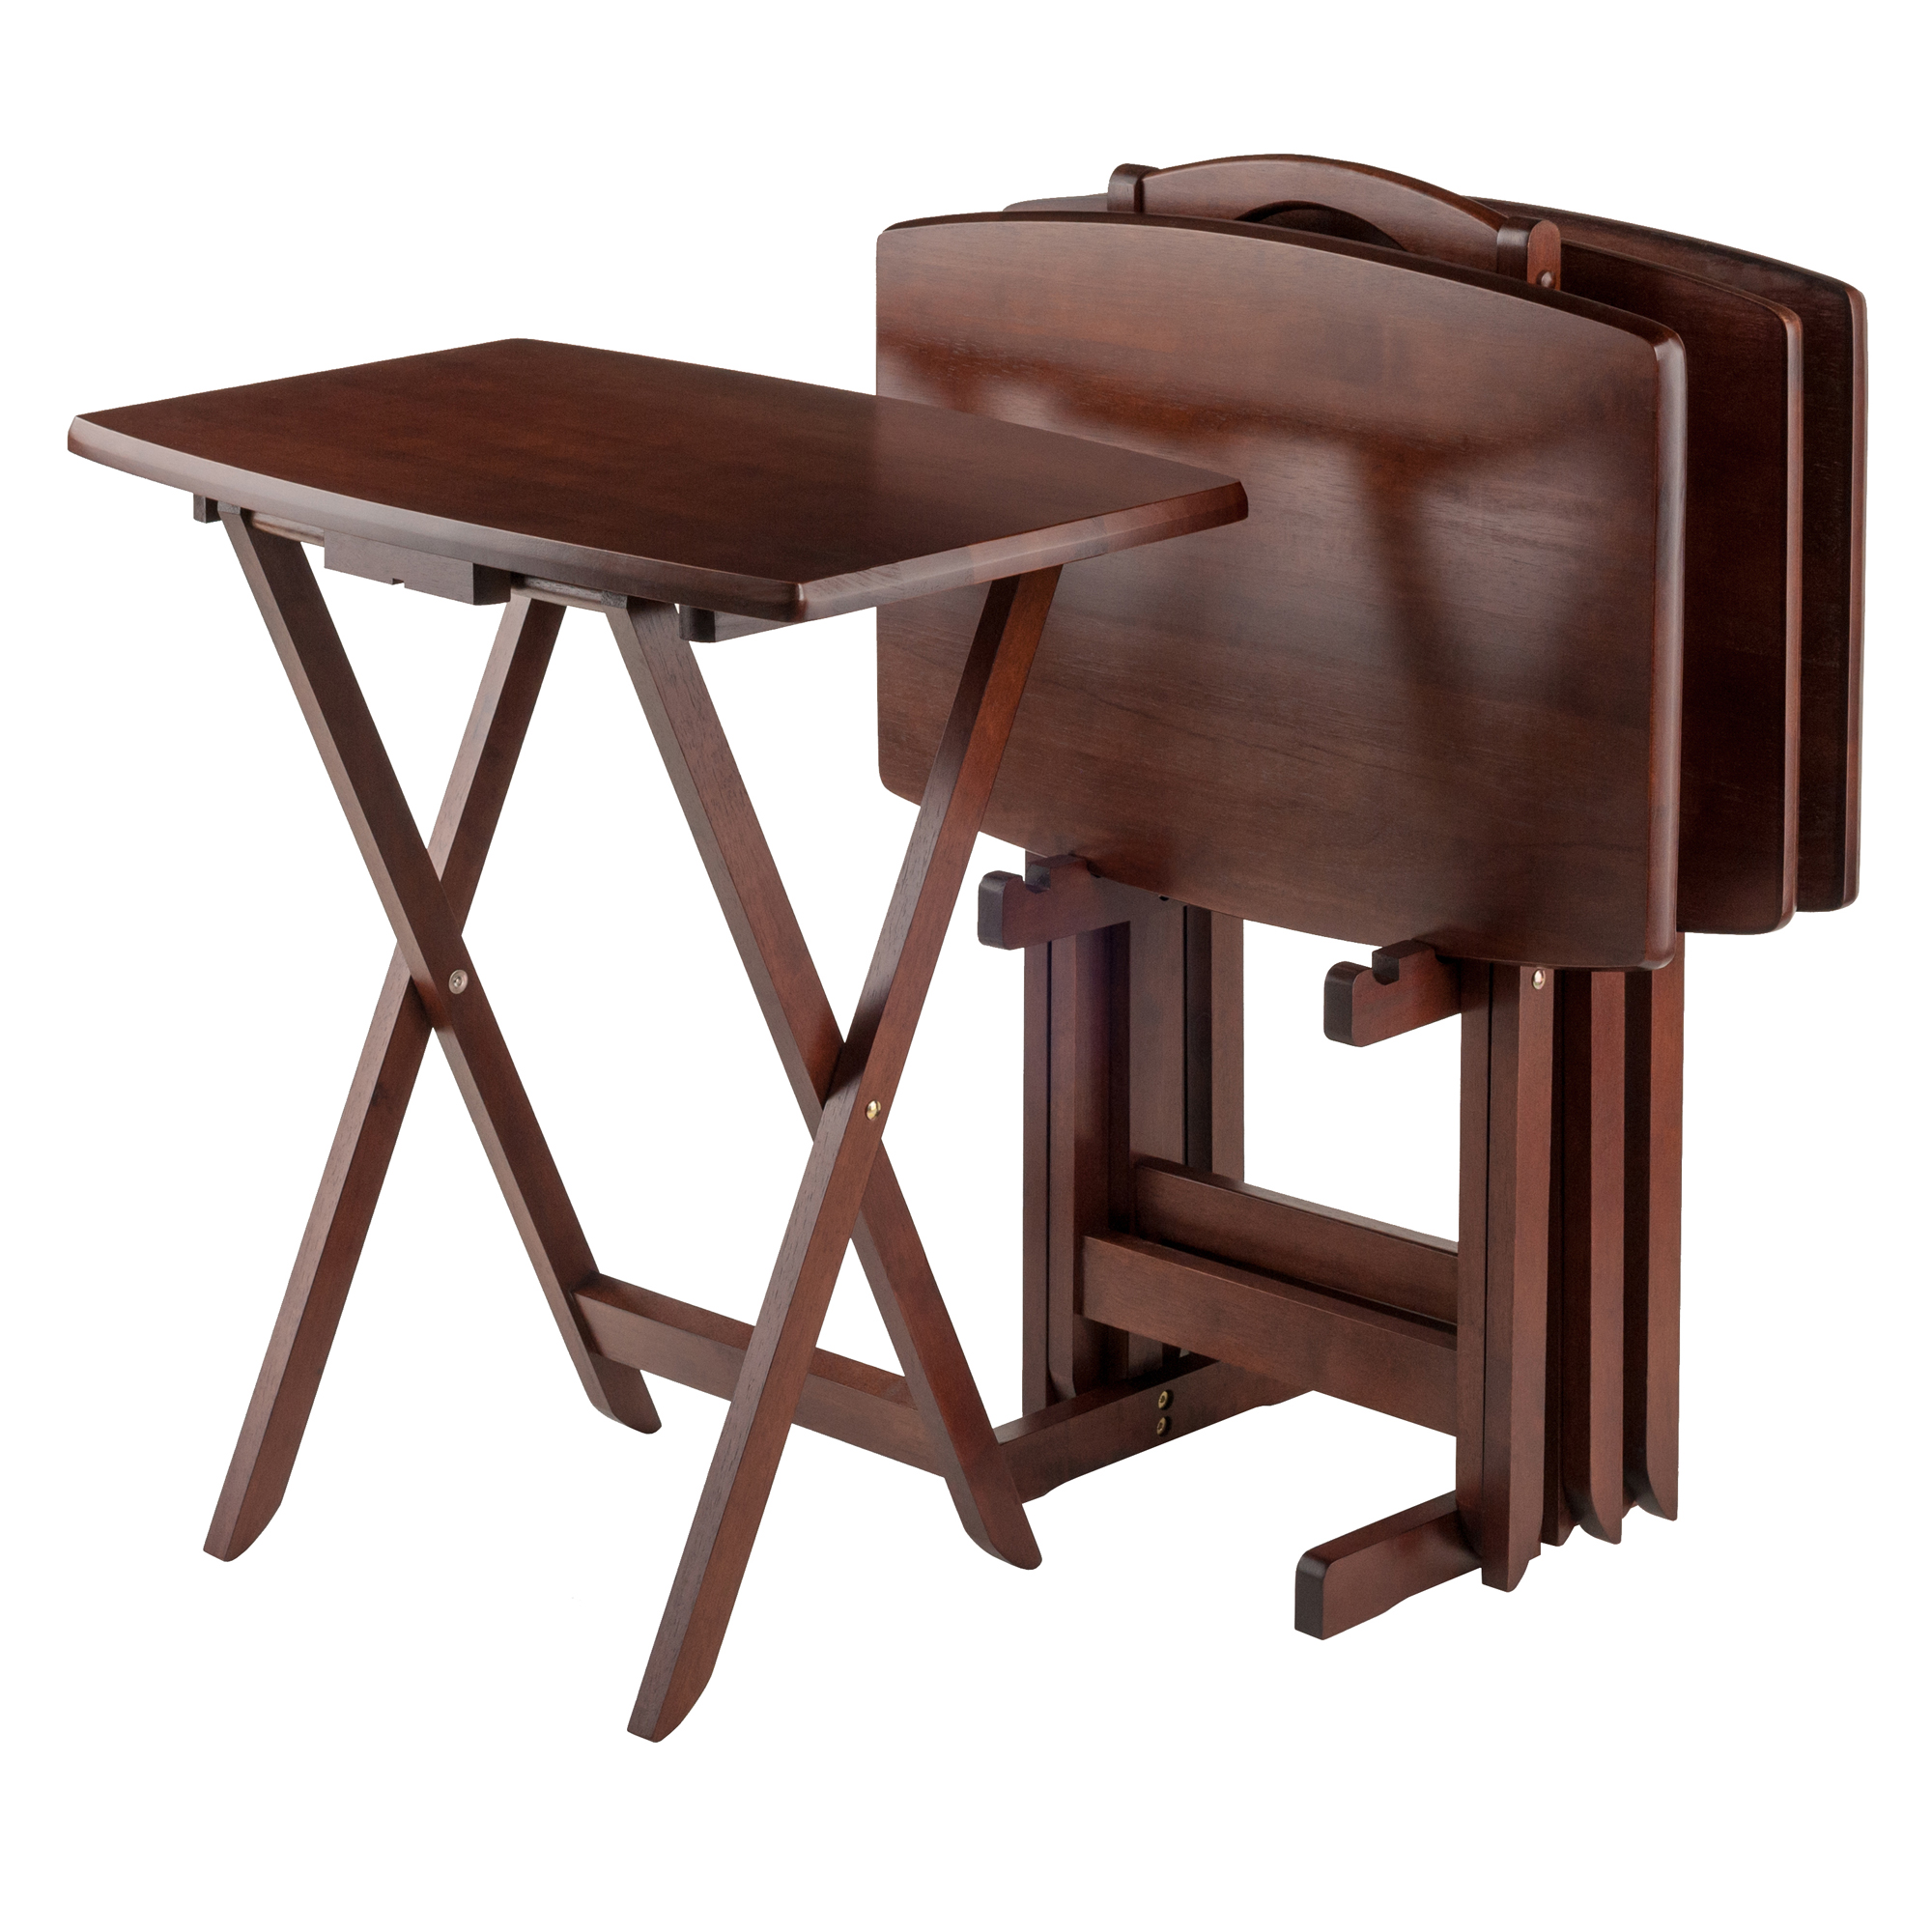 Contemporary Home Living Set of 4 Rich Walnut Oversize Folding Snack Table 25.5"